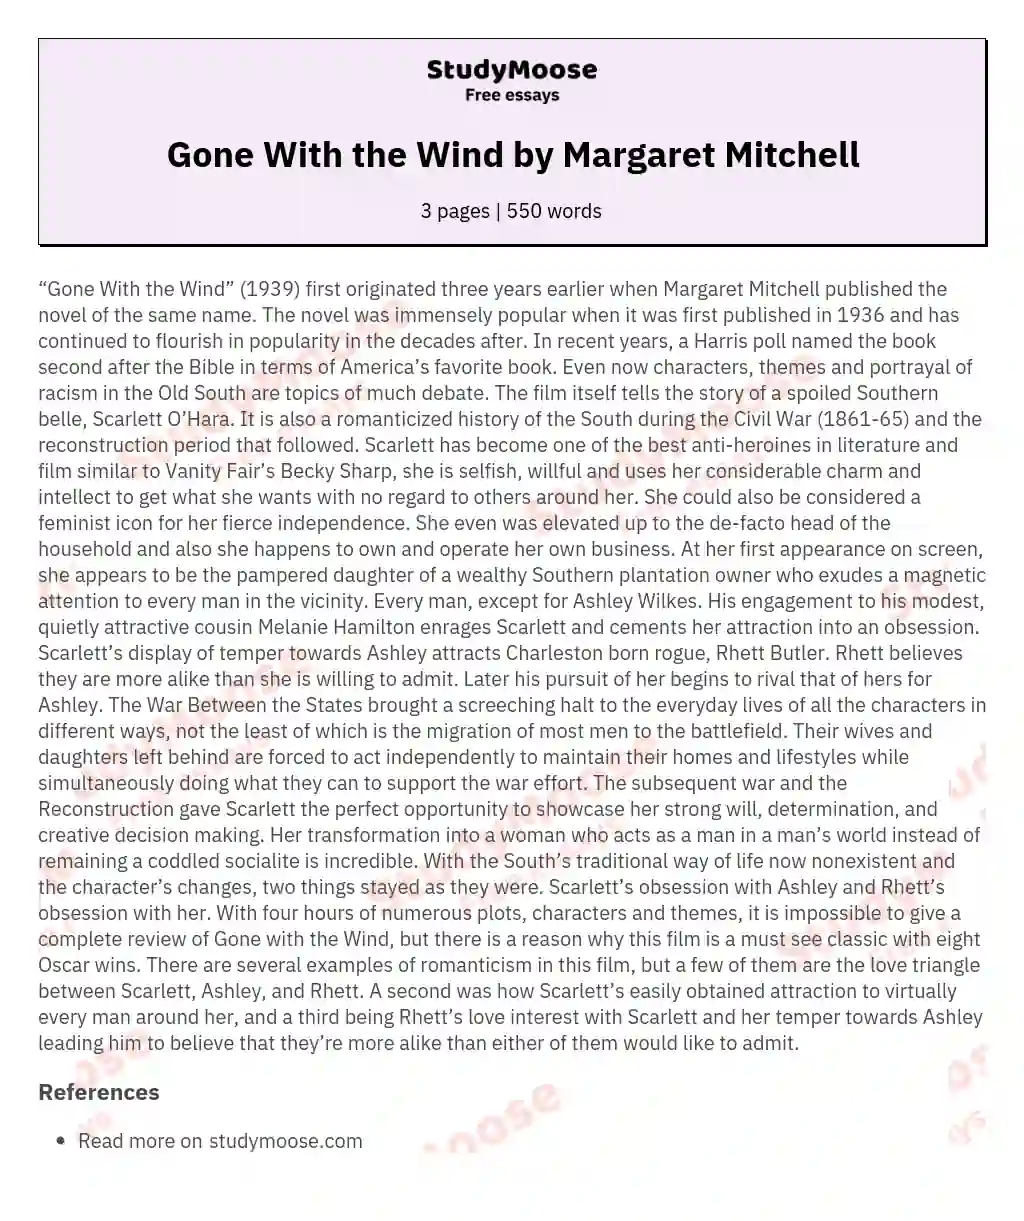 Gone With the Wind by Margaret Mitchell essay